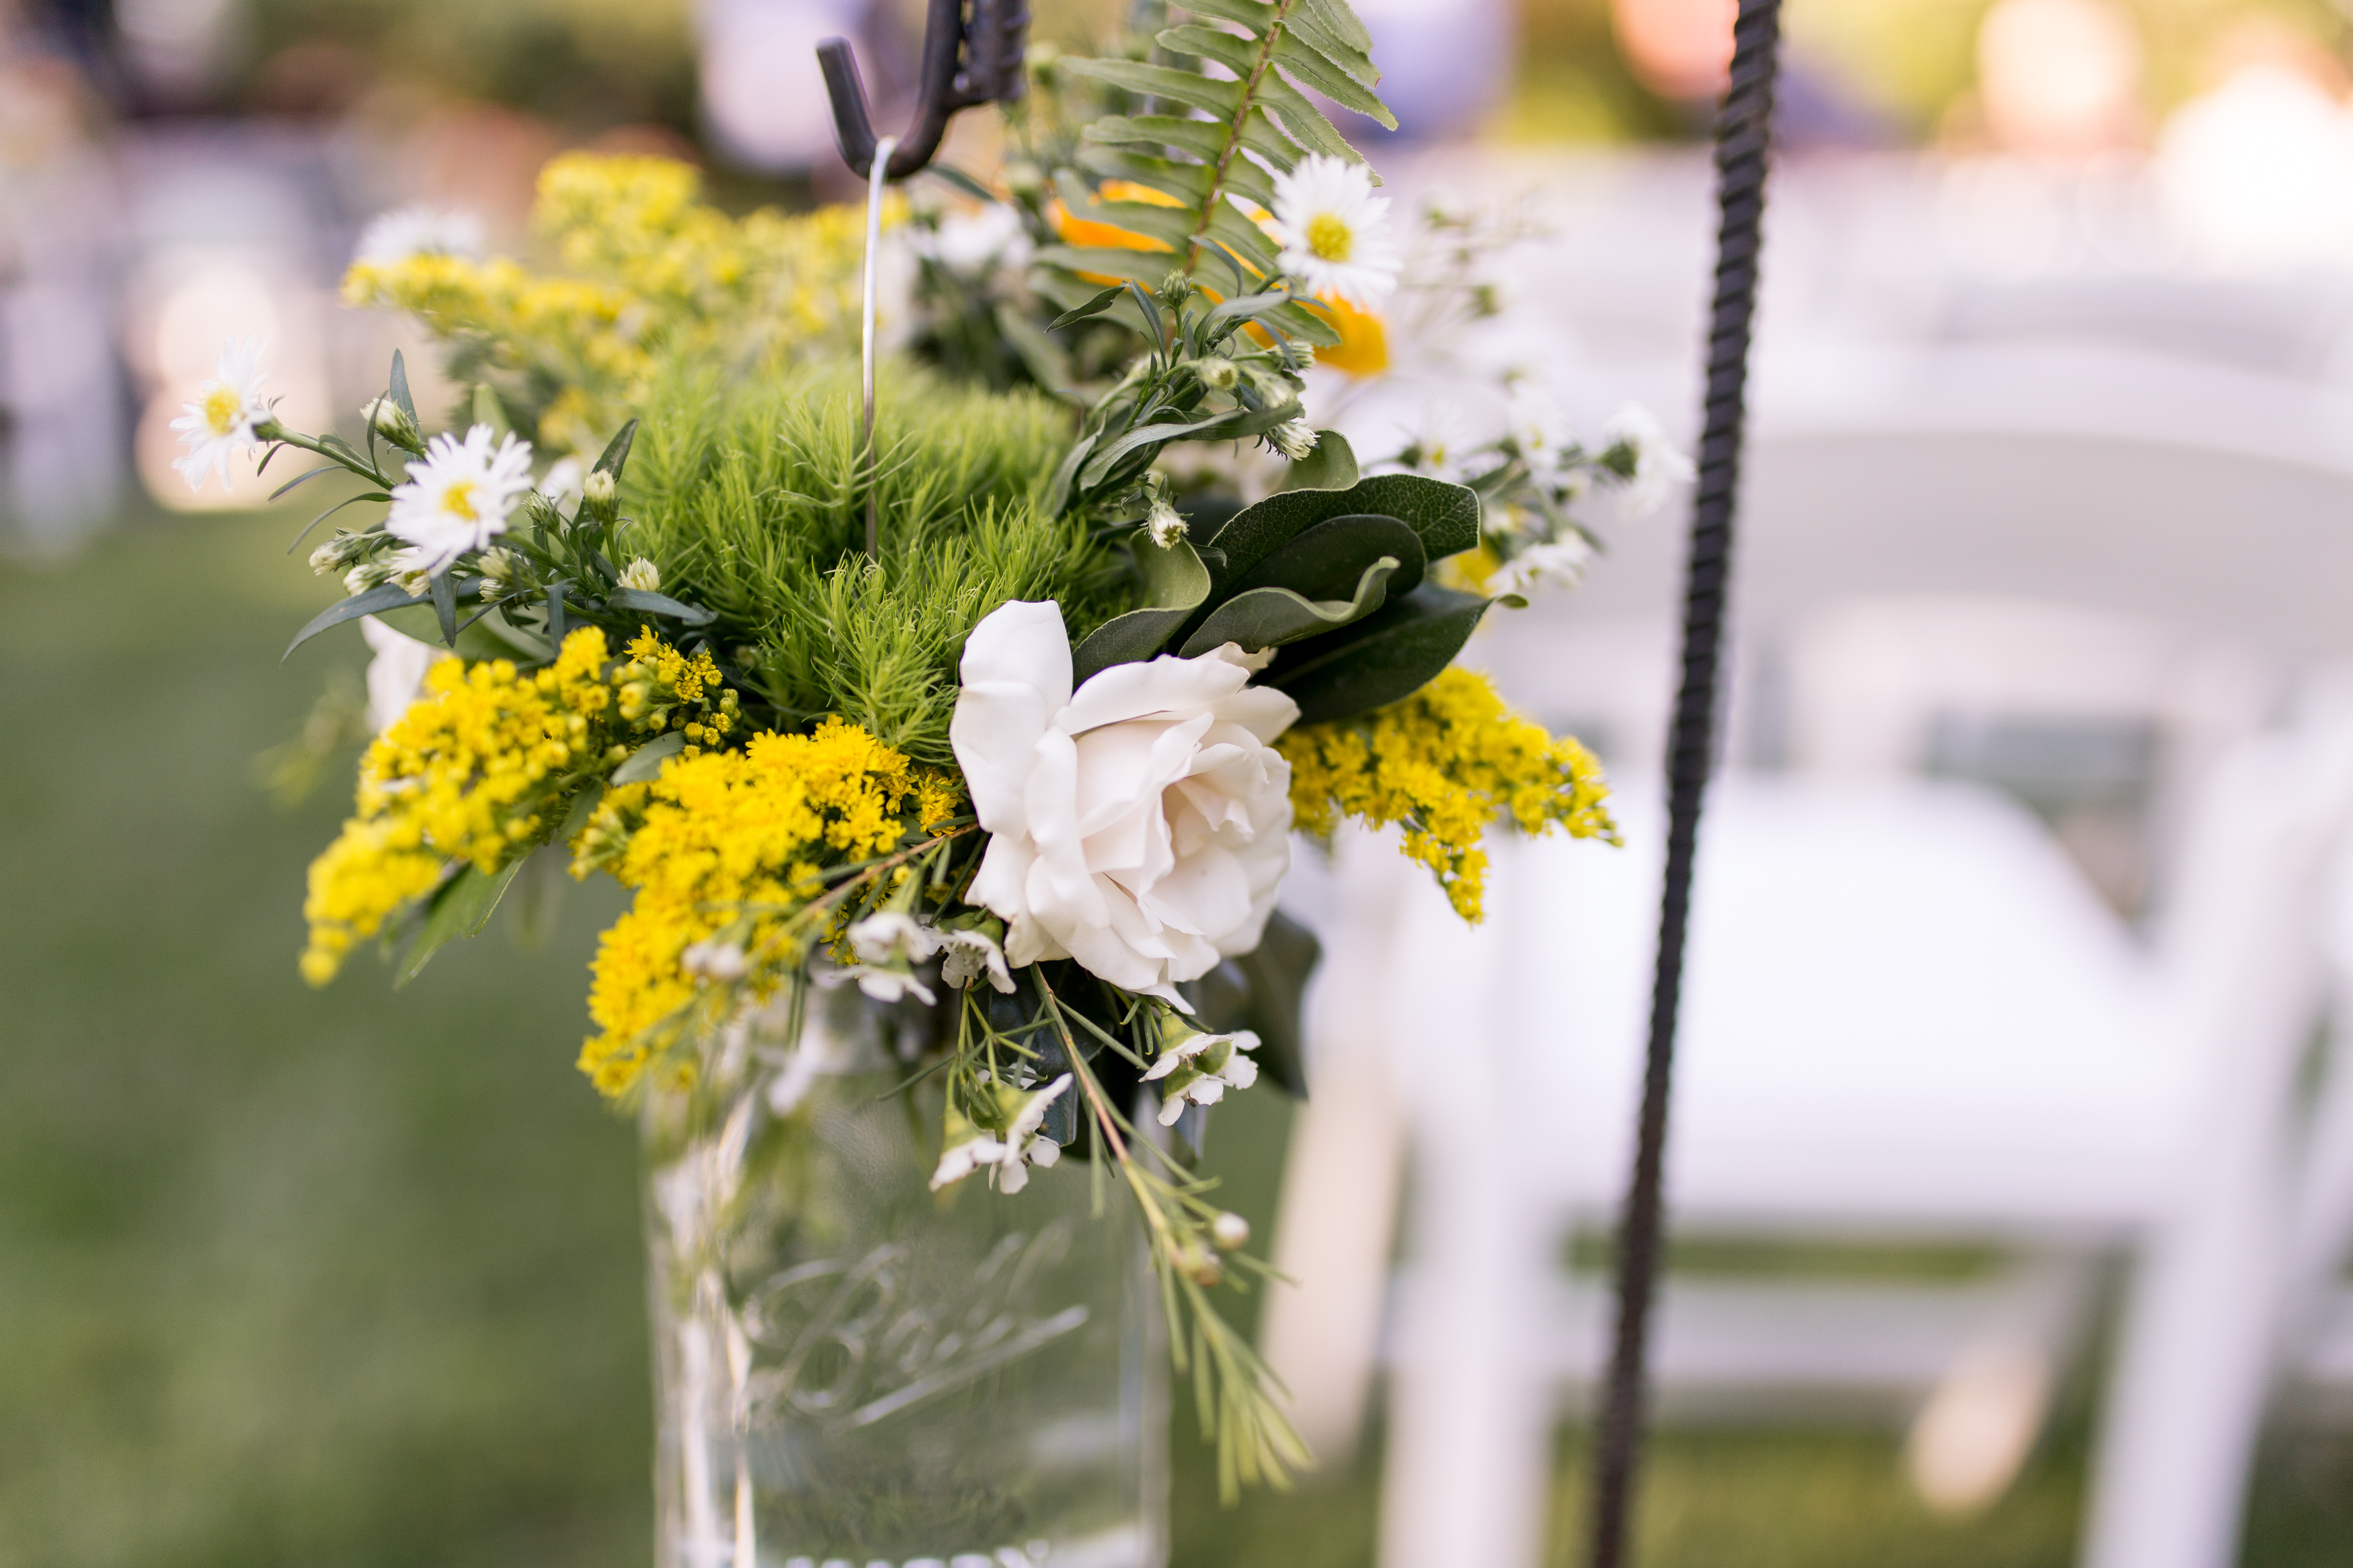 flowers in Ball jars for Muncie Indiana wedding at Minnetrista